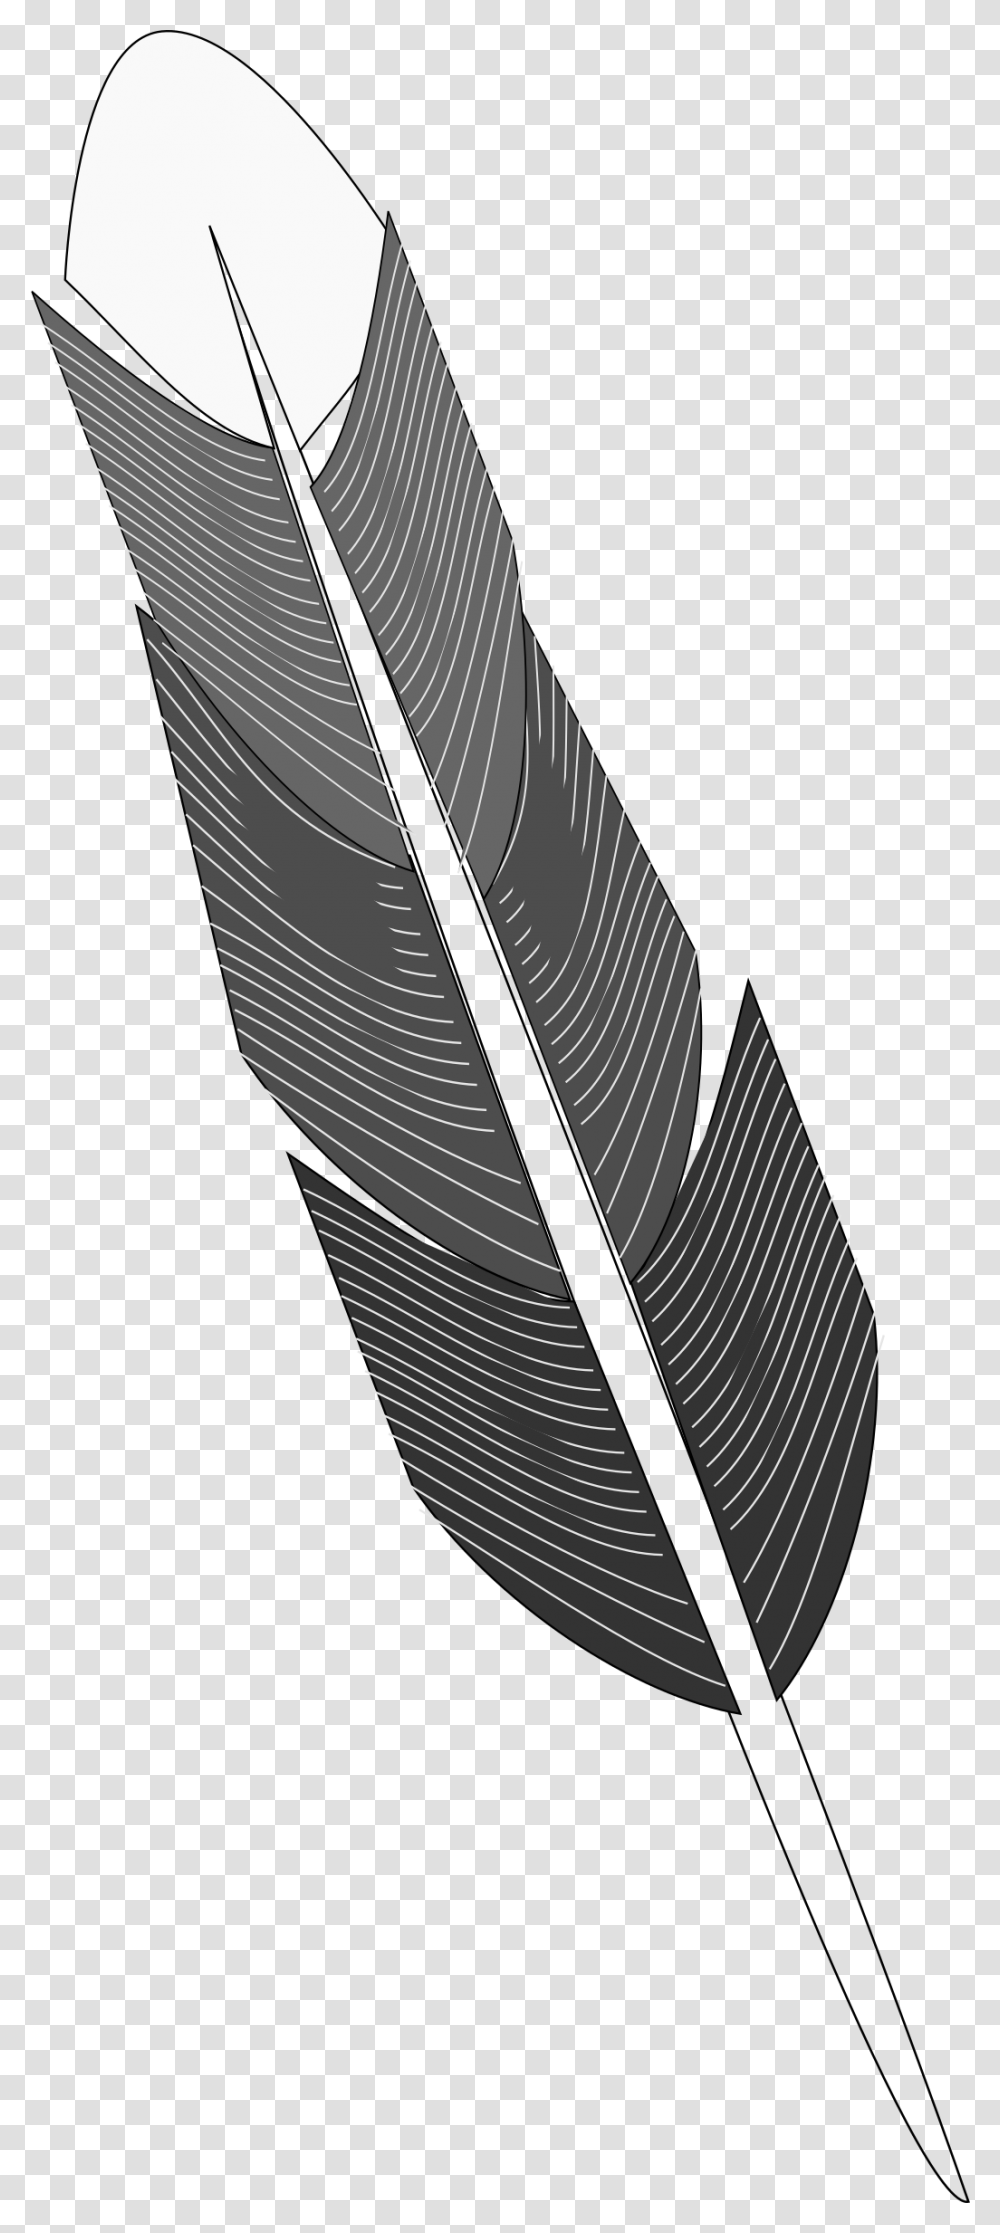 Grayscale Feather Clip Arts Grayscale Feather, Leaf, Plant, Veins, Silhouette Transparent Png